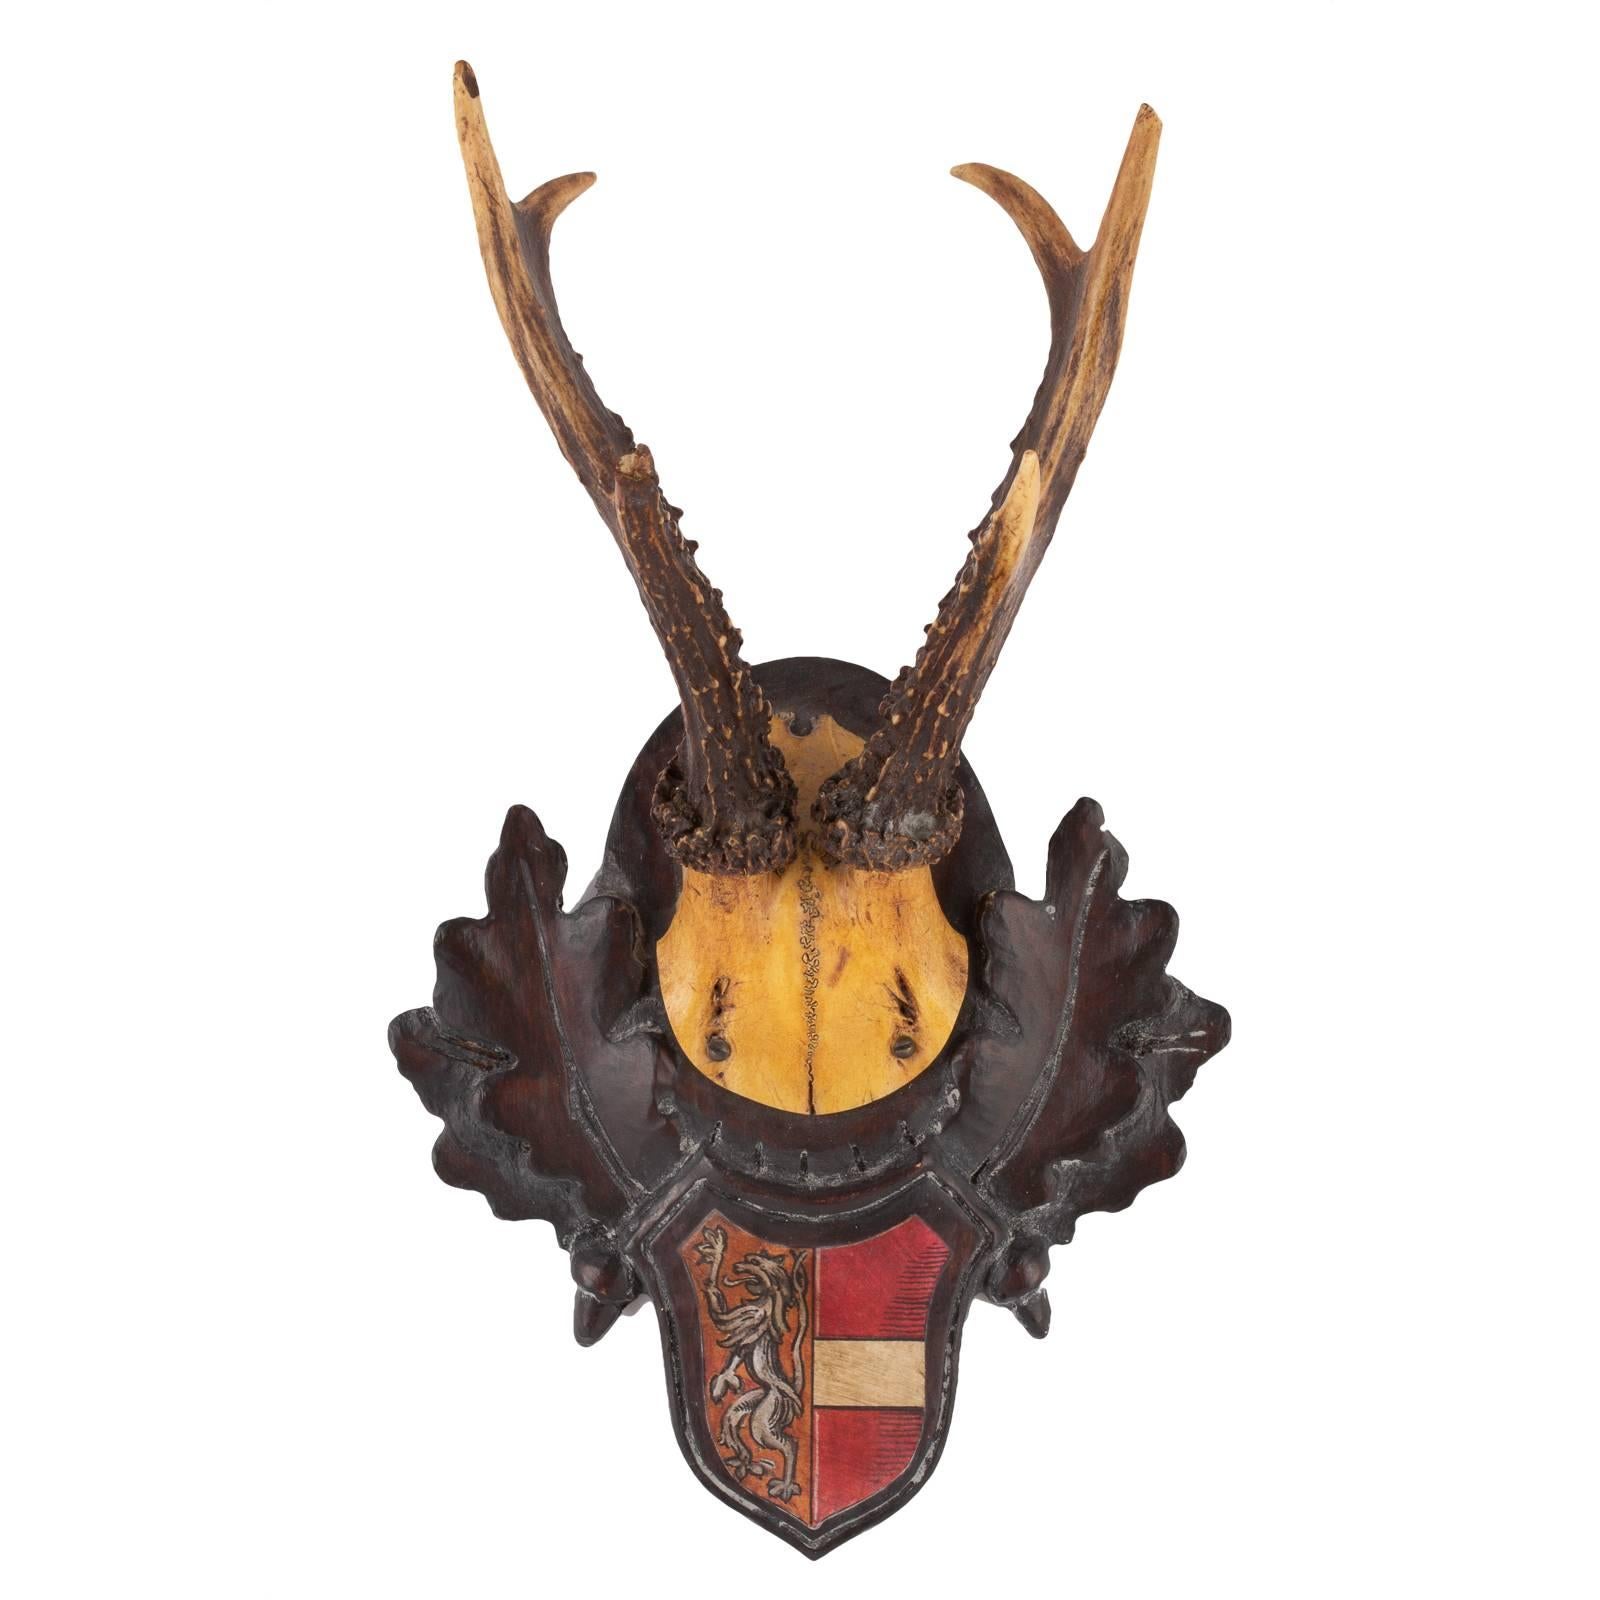 This grouping of hunting trophies originated from the Eckartsau castle of Emperor Franz Josef in the Southern Austrian Alps. Eckartsau was a favourite hunting schloss of the Habsburg family. The Heraldic badge appears to be a crest of a noble